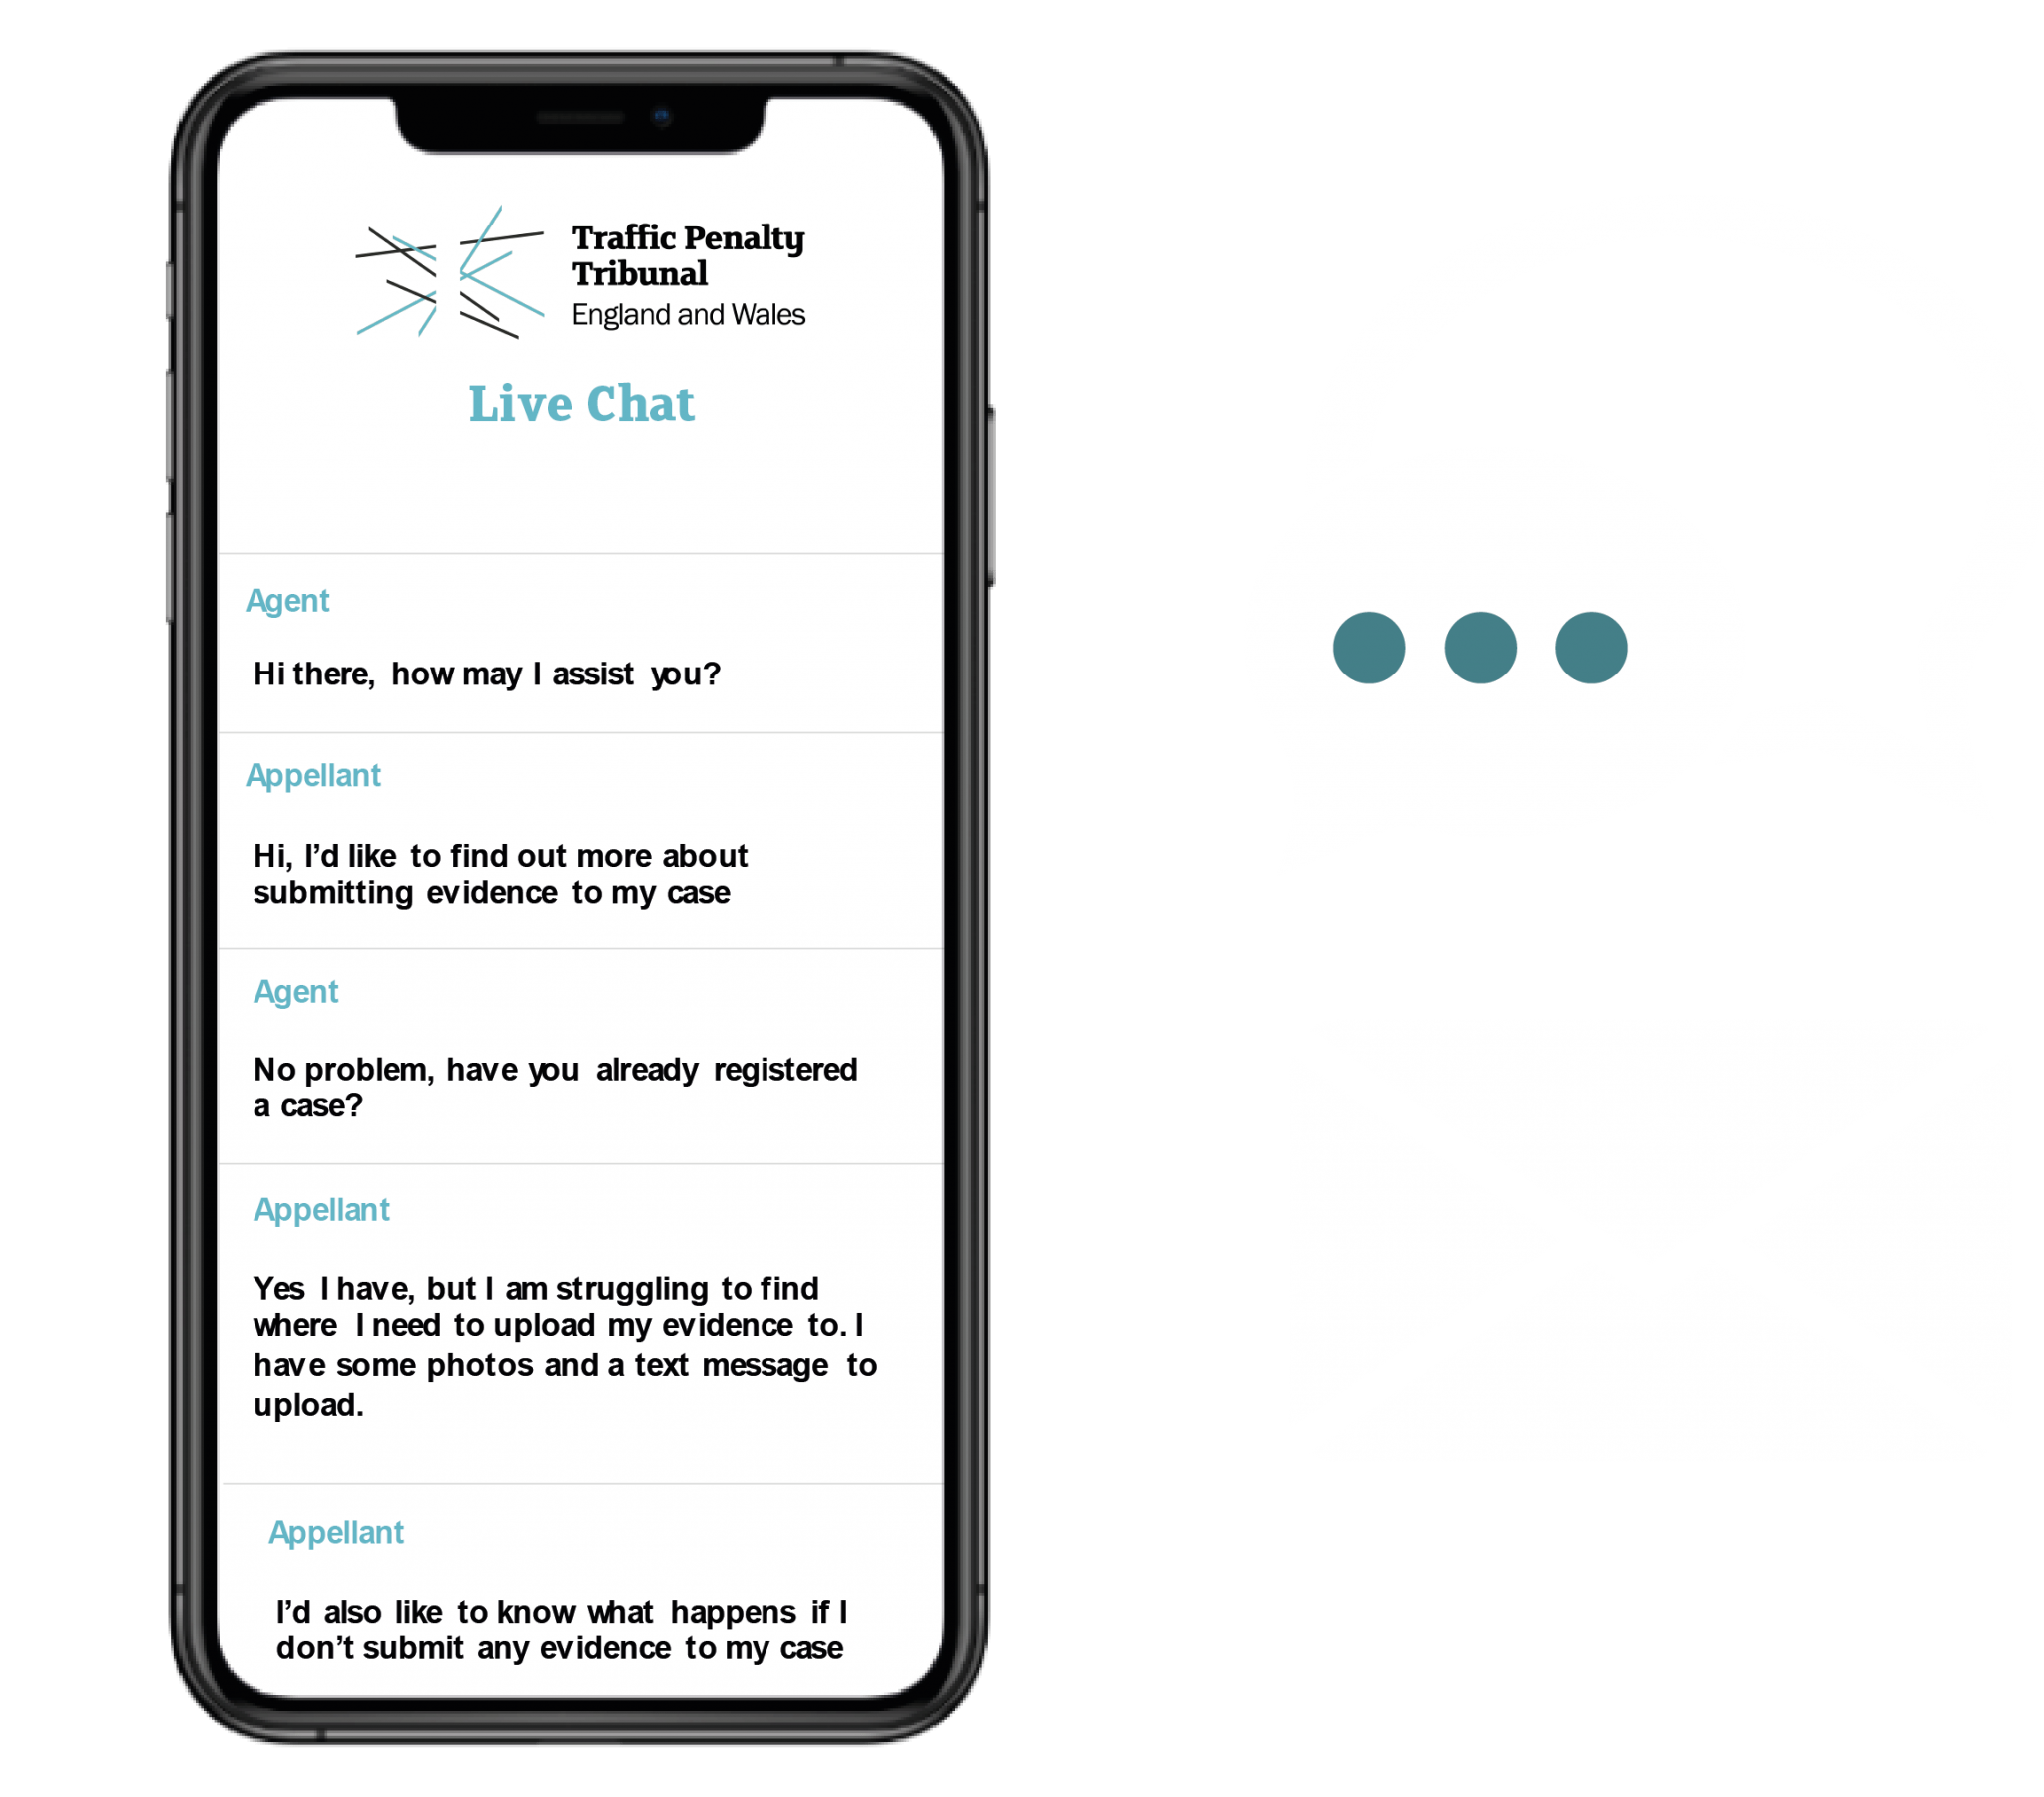 Phone showing Live Chat conversation, next to a chat icon and envelope icon showing email